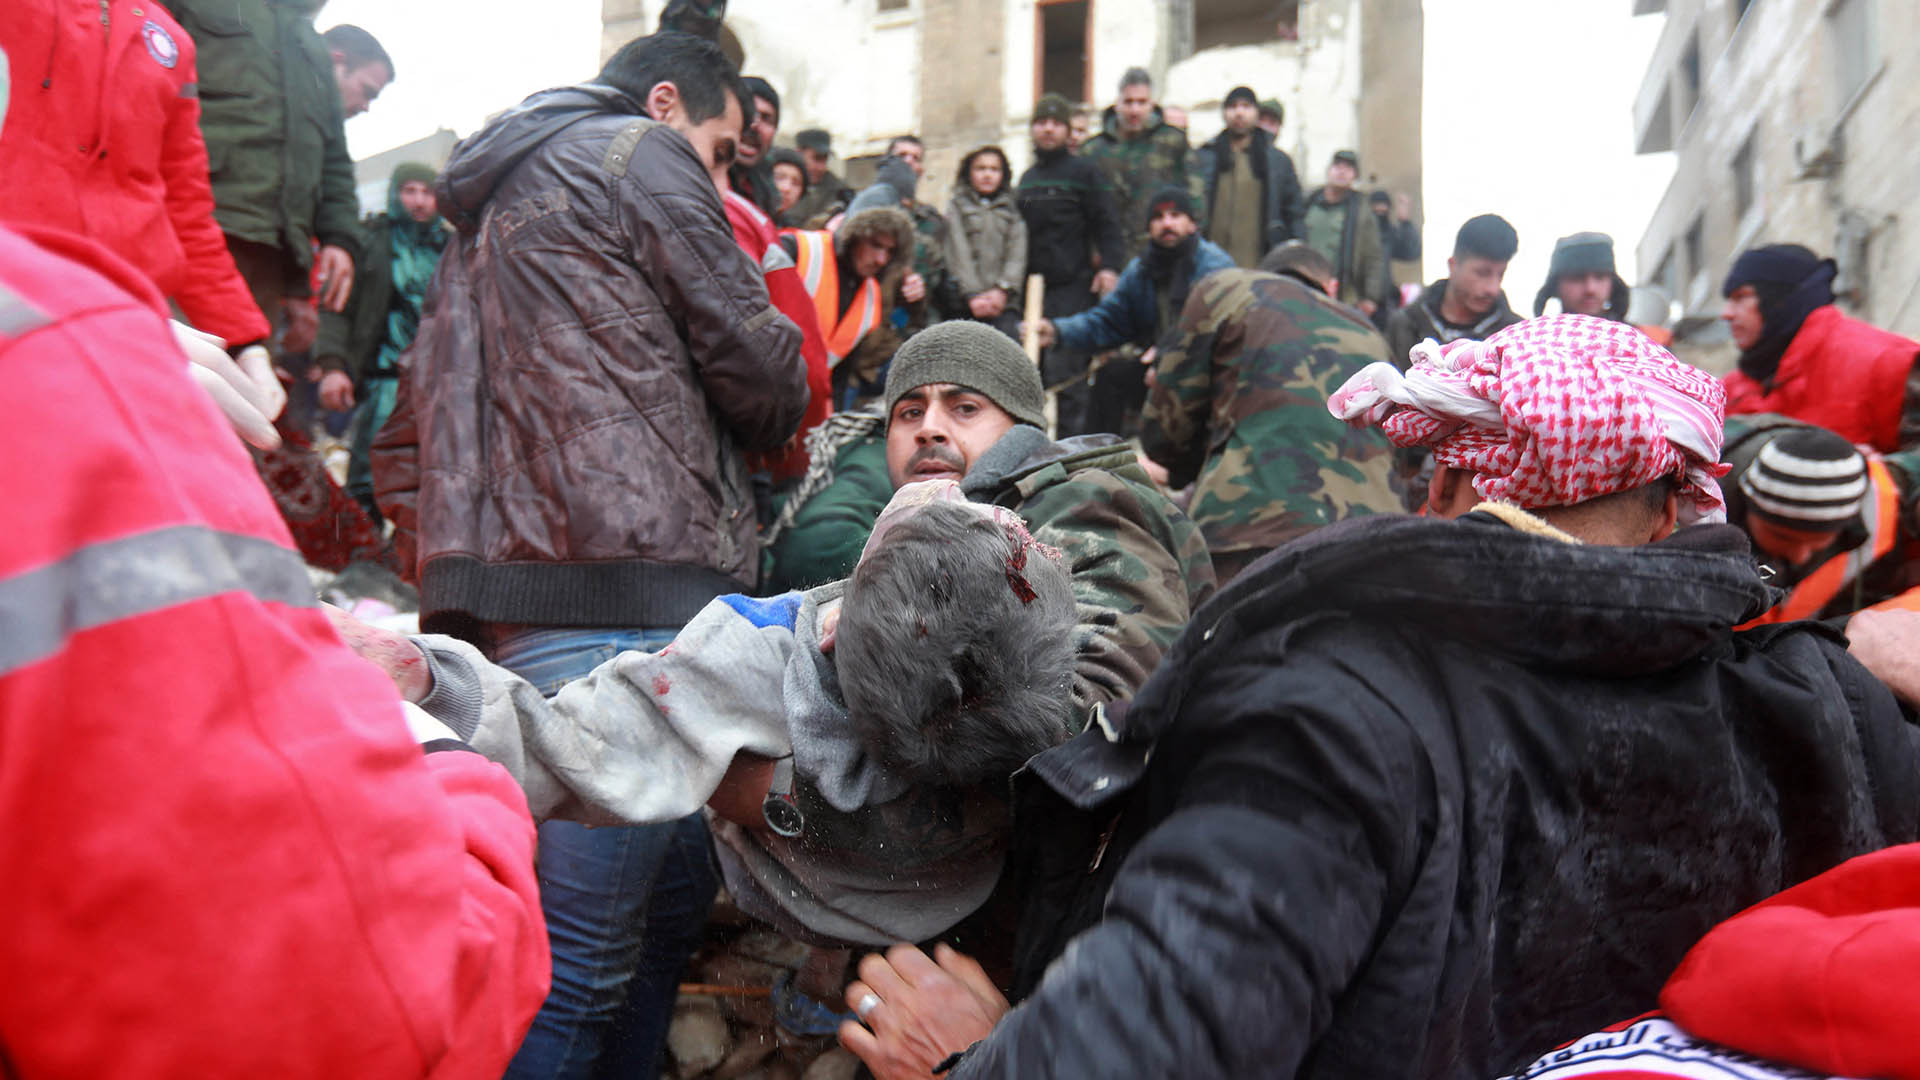 EDITORS NOTE: Graphic content / Syrian rescue teams carry a casualty picked up from the rubble after an earthquake in the government-controlled central Syrian city of Hama on February 6, 2023. - A 7.8-magnitude earthquake hit Turkey and Syria early on February 6, killing hundreds of people as they slept, levelling buildings and sending tremors that were felt as far away as the island of Cyprus, Egypt and Iraq. (Photo by LOUAI BESHARA / AFP)